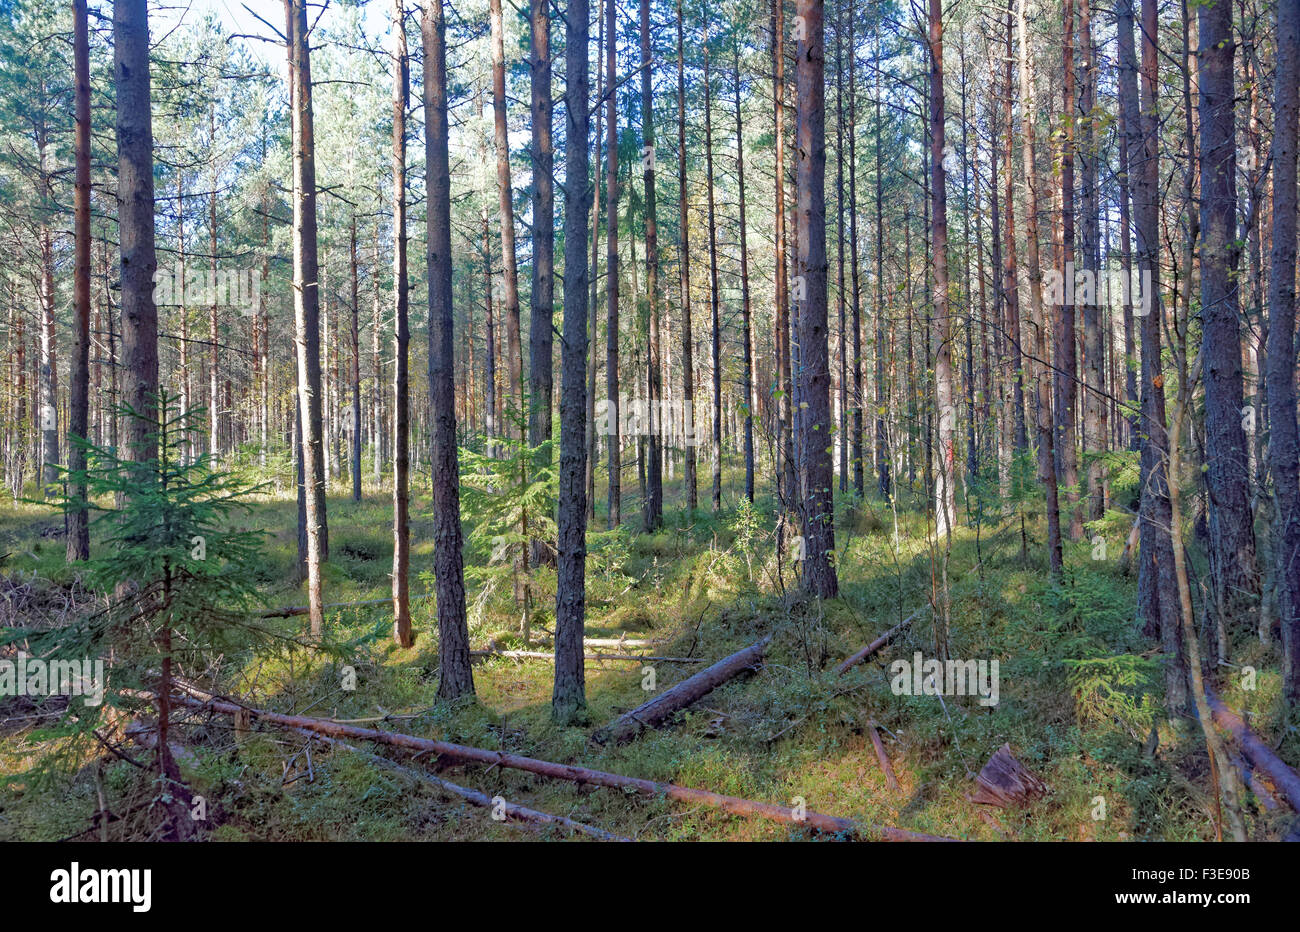 Coniferous forest in Sothern Estonia. Stock Photo